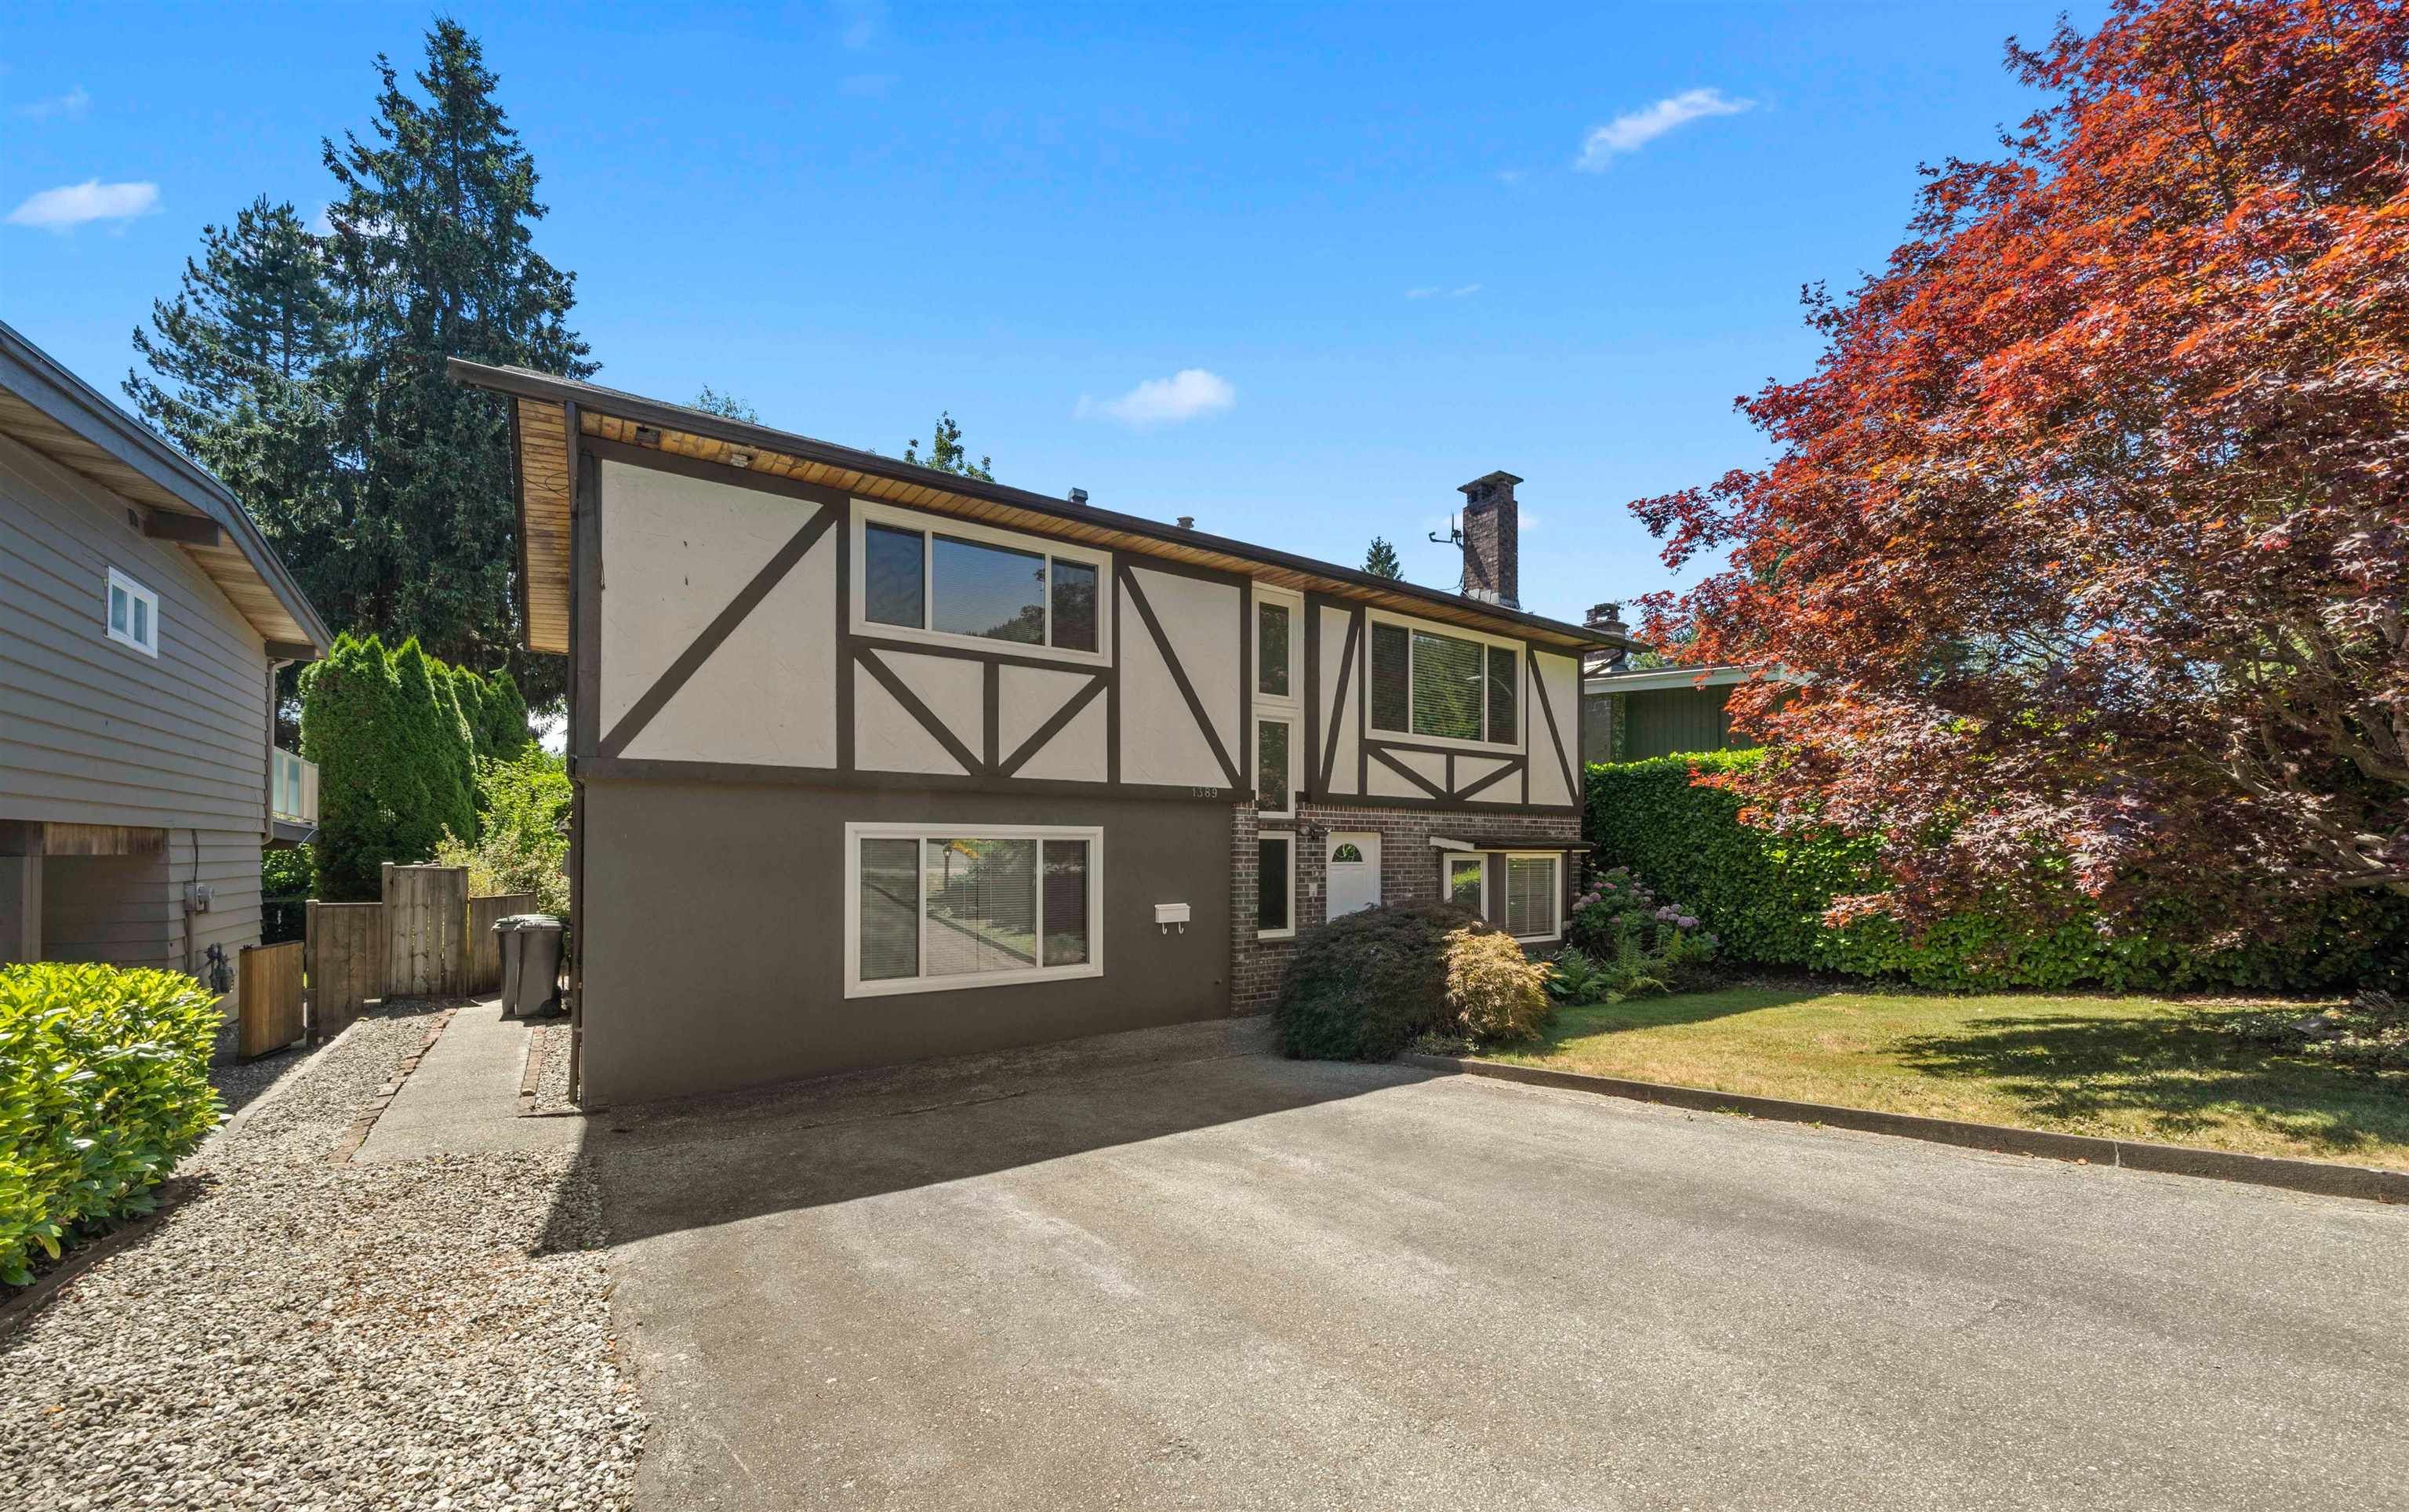 Just sold! Another happy client at 1389 WELLINGTON DR in North Vancouver